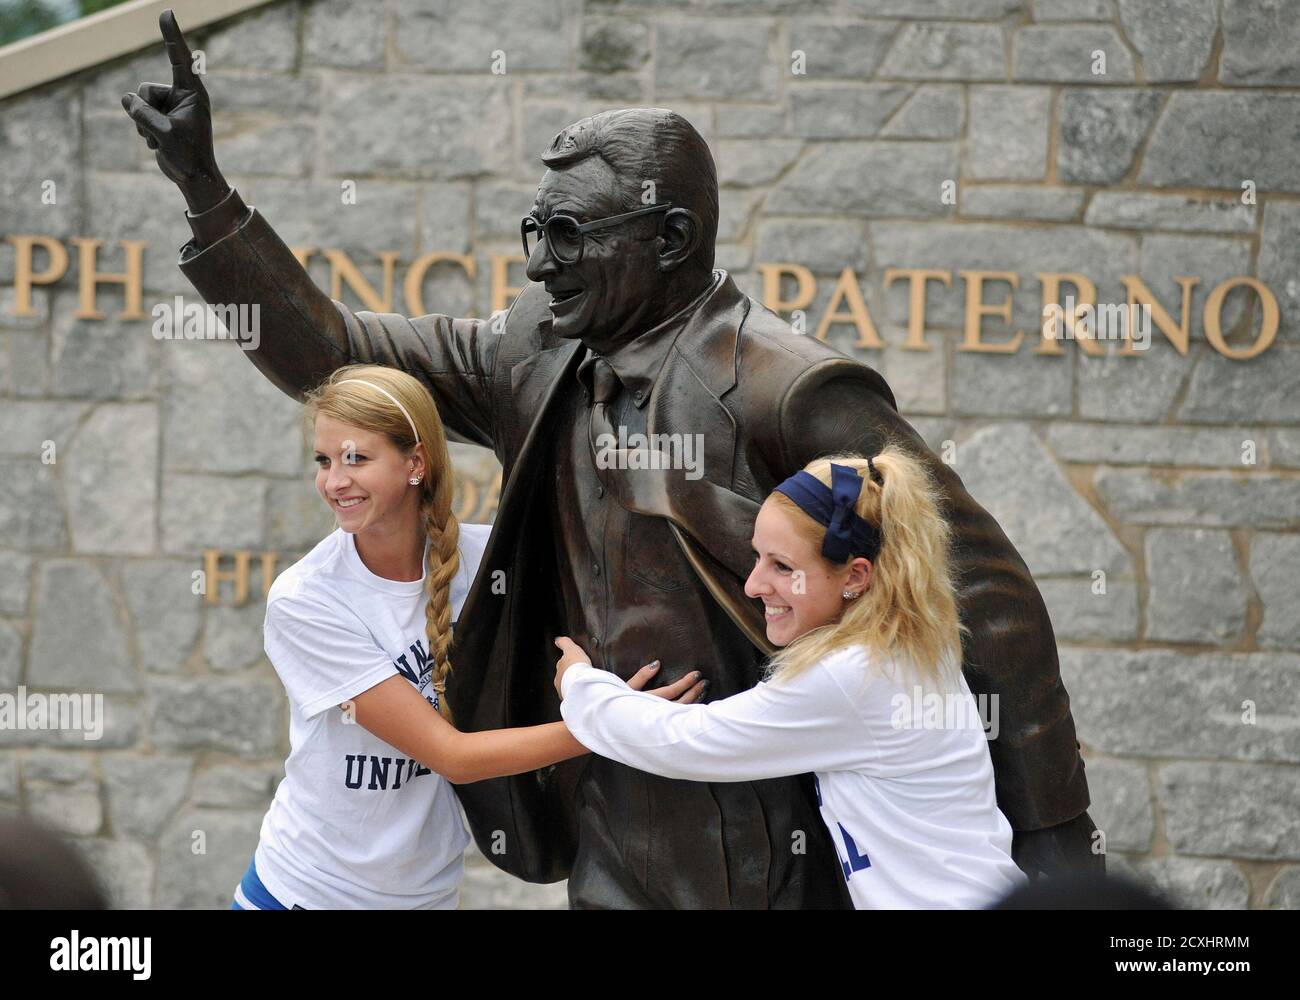 Penn State freshmen Caroline Vink (L) from Kutztown and Alexandra Brennan from Hazleton hug the Joe Paterno statue outside Beaver Stadium in State College, Pennsylvania, July 20, 2012. Penn State leaders acknowledged that the seven-foot (2.1-metre) statue of the late Paterno had become 'a source of division' at the school after Jerry Sandusky, Paterno's former assistant coach, was convicted in June of sexually abusing 10 boys over 15 years. The statue was removed on July 22. Picture taken July 20, 2012. REUTERS/Pat Little (UNITED STATES - Tags: SPORT FOOTBALL EDUCATION CRIME LAW) Stock Photo